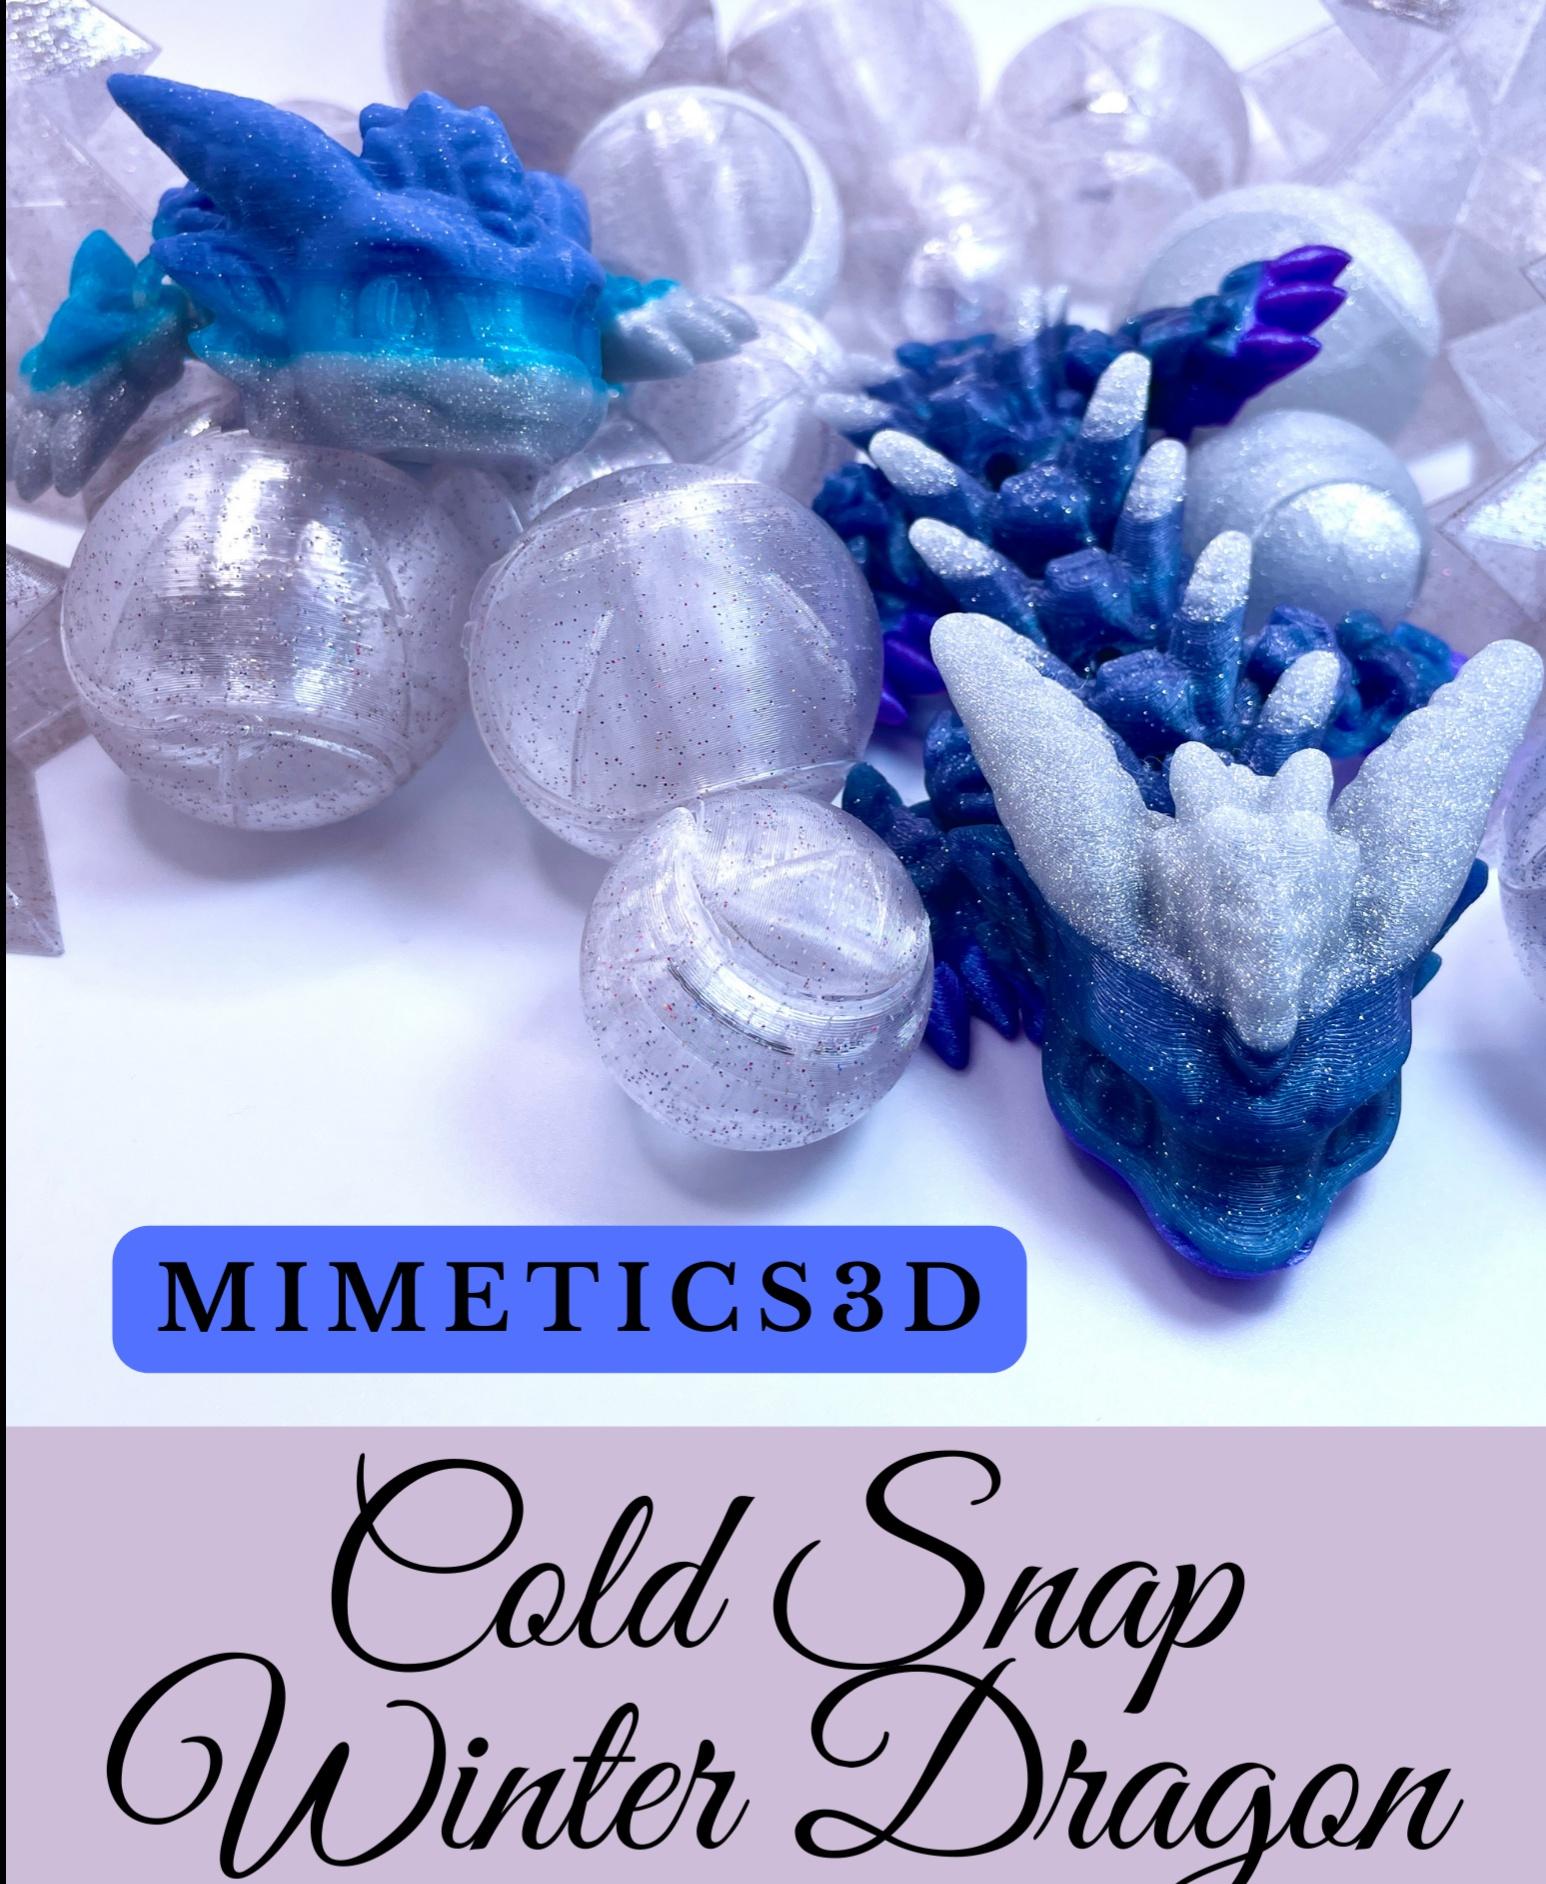 Cold Snap, Winter Dragon Child - Articulated Snap-Flex Fidget (Medium Tightness Joints) - So so cute! I loved using all my icy filaments!  Protopasta Marine Dream Blue, Nebula Night Glow and Glitter Flake Stardust, along with Capricorn Sparkly Blue PLA! - 3d model